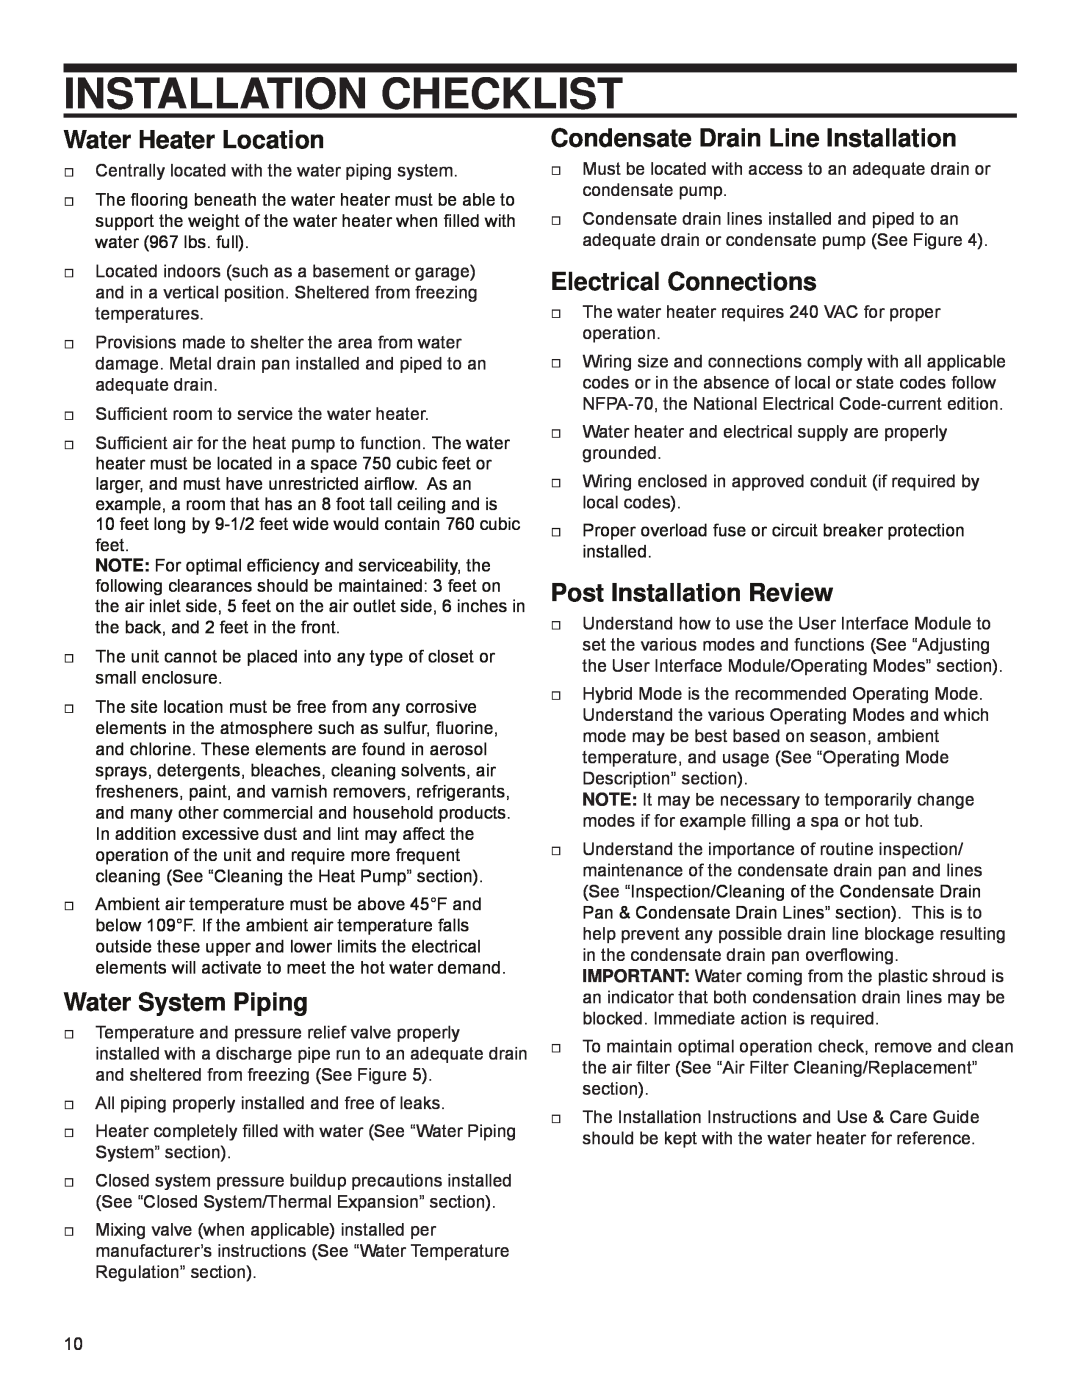 Univex EPX-80DHPT, 318258-000 Installation Checklist, Water Heater Location, Water System Piping, Electrical Connections 